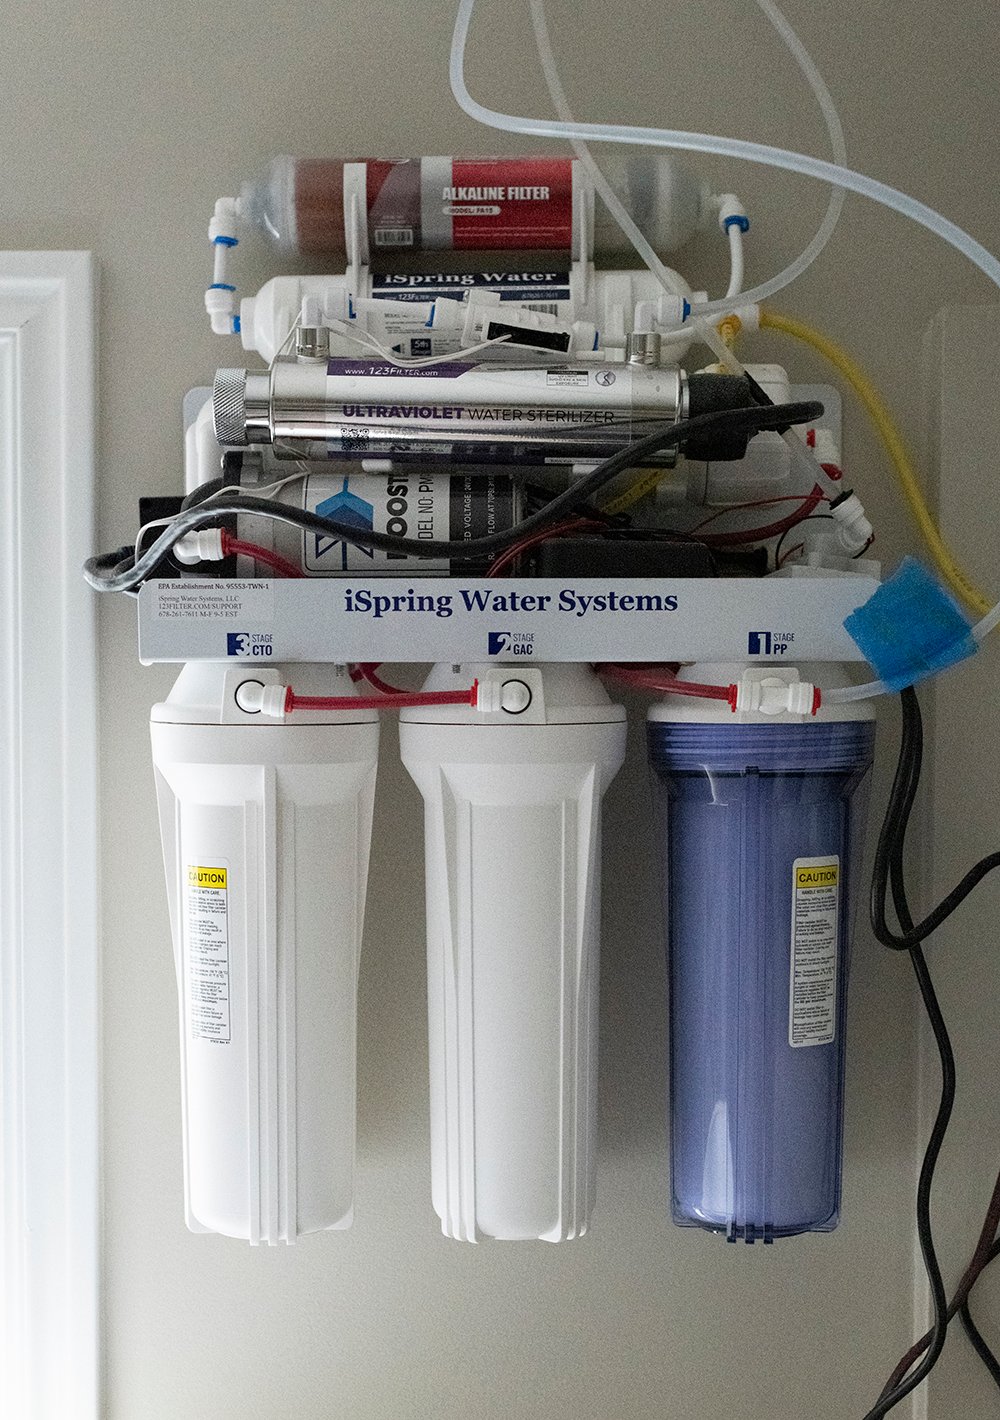 Our Water Filtration System - roomfortuesday.com